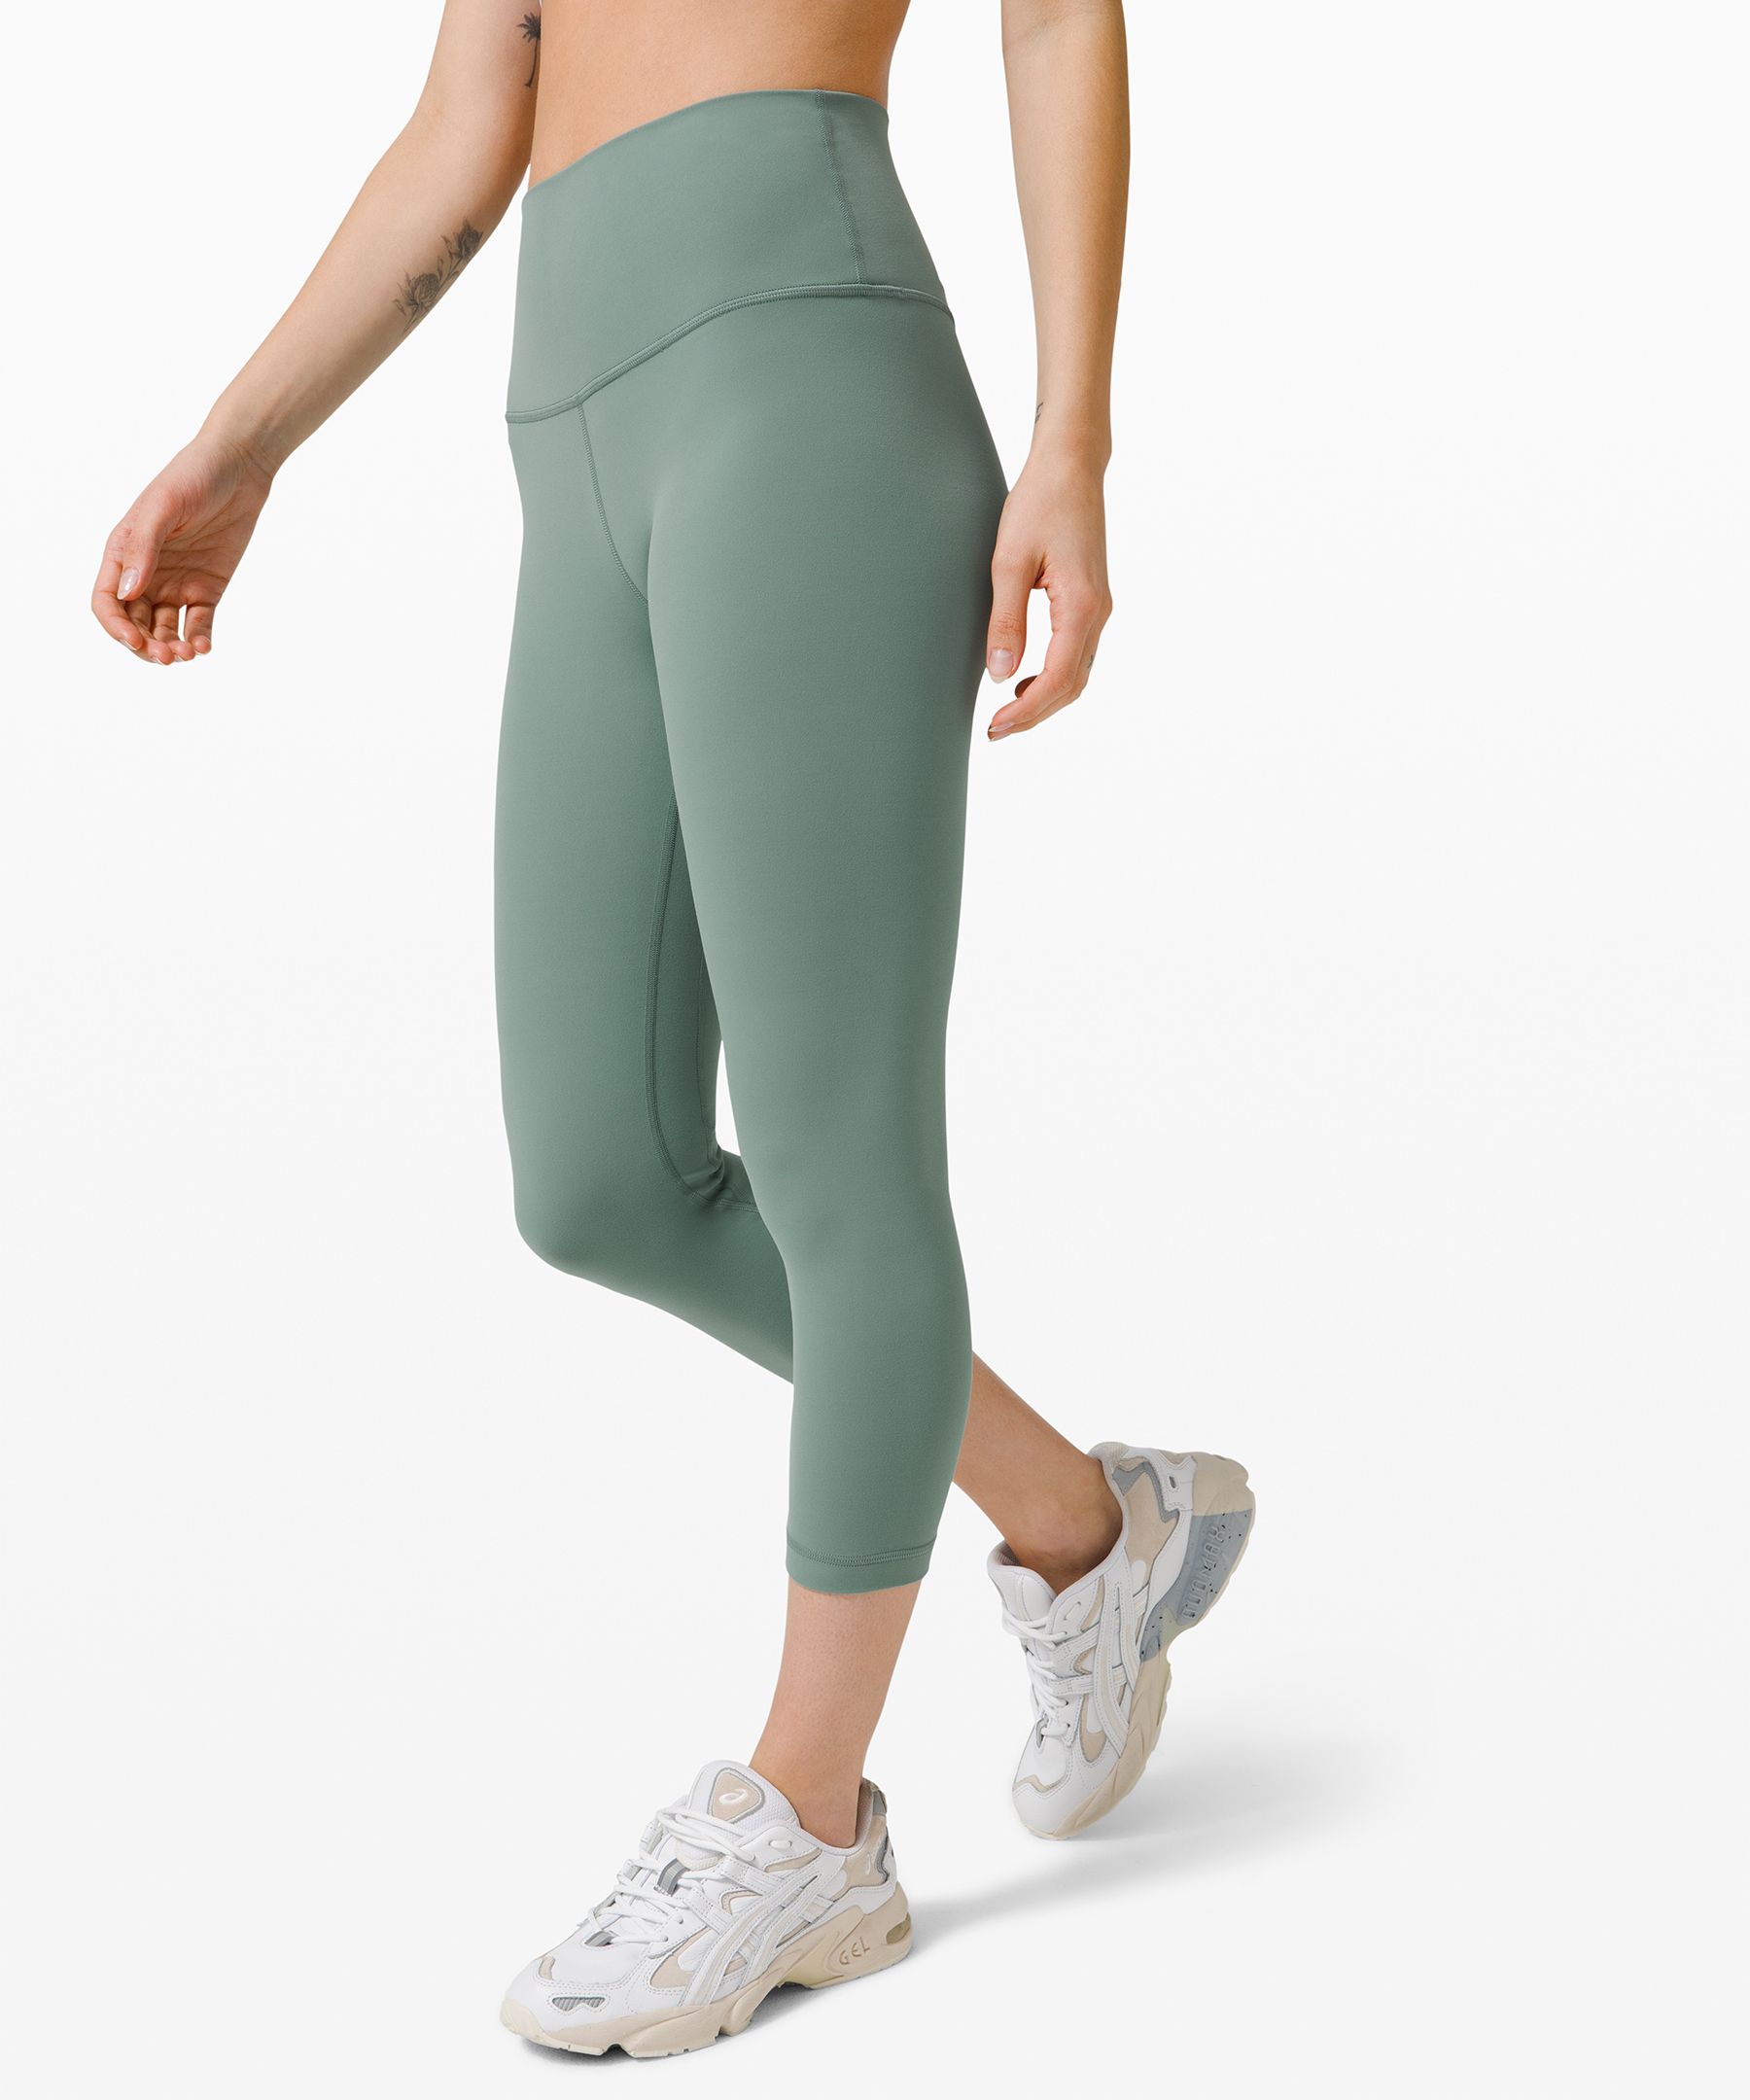 Ok, Lululemon Just Secretly Dropped Up to 80% Off Our Fave Leggings